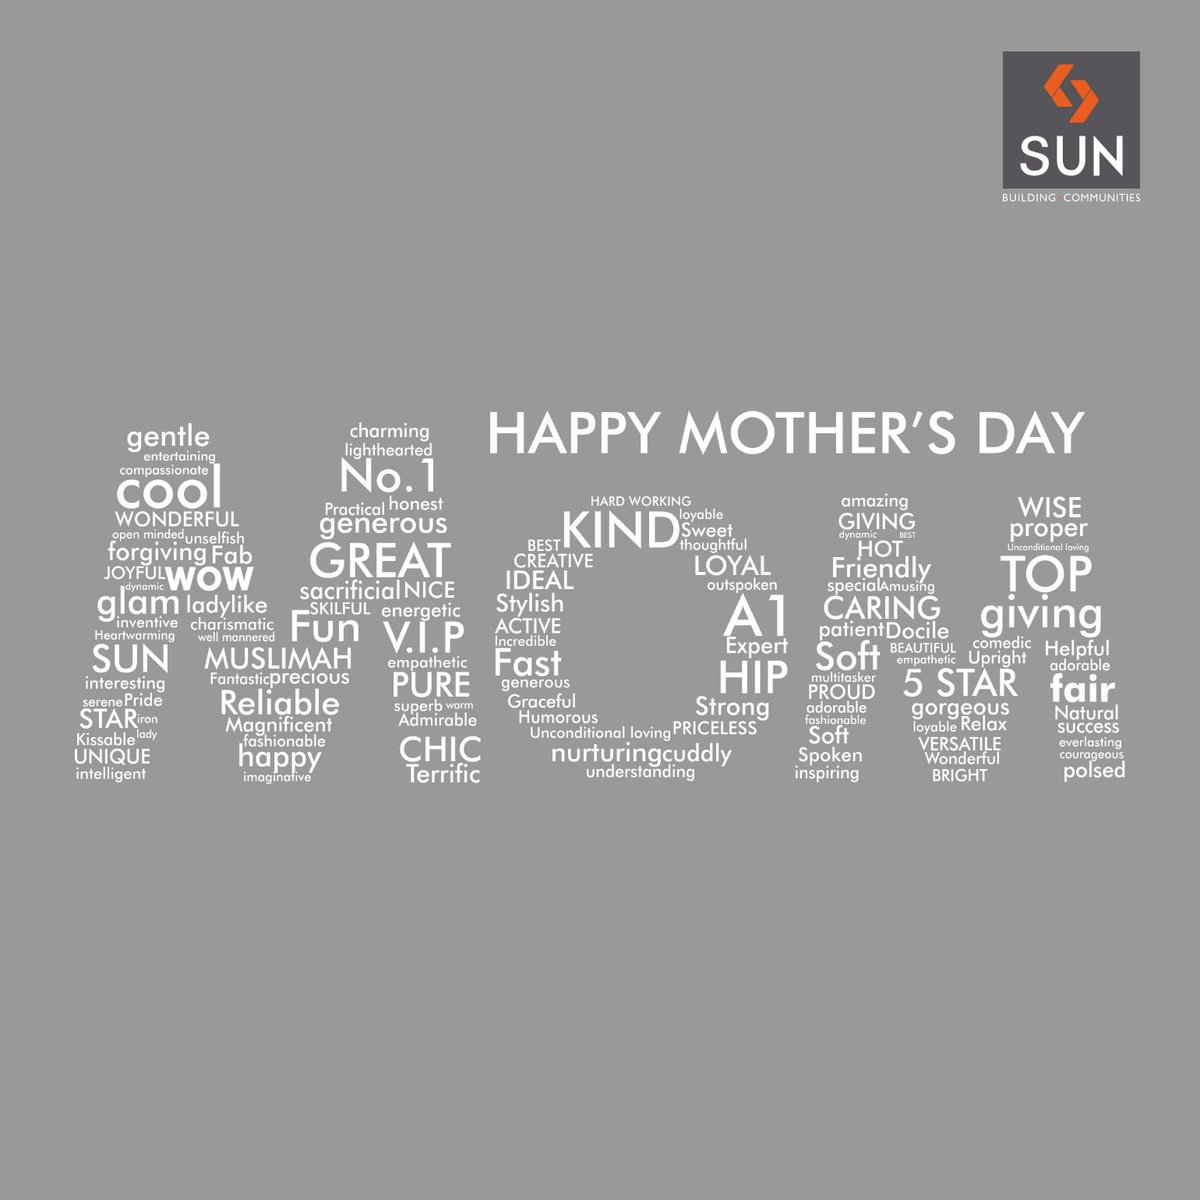 Happy #MothersDay to All Moms!
We salute the spirit of #motherhood. https://t.co/sCab0Ad6XL